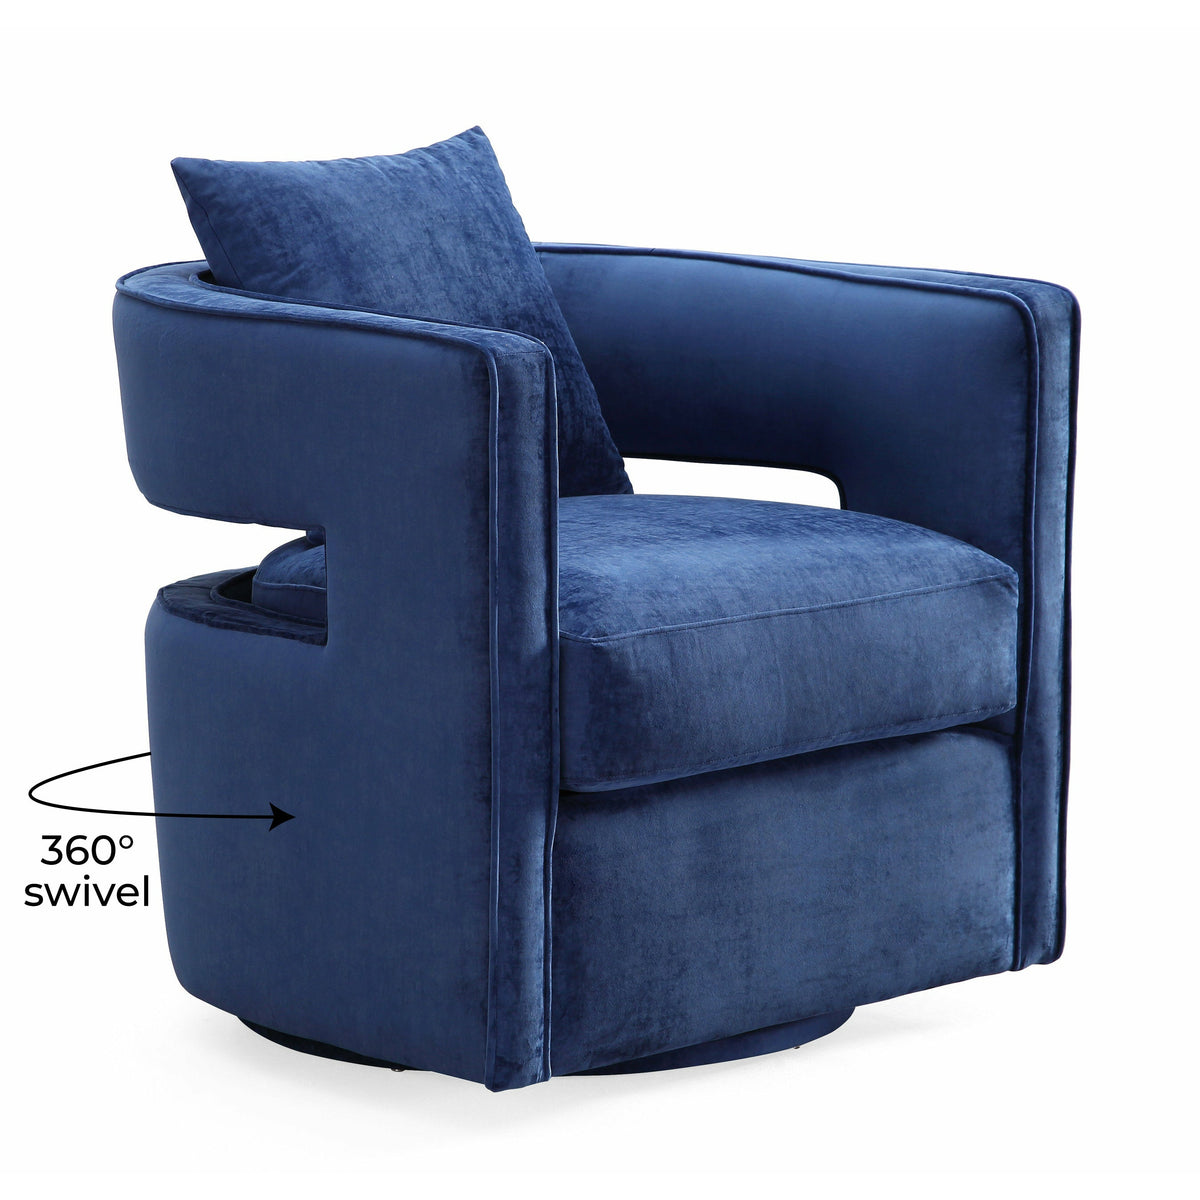 Kennedy Navy Swivel Chair - Be Bold Furniture